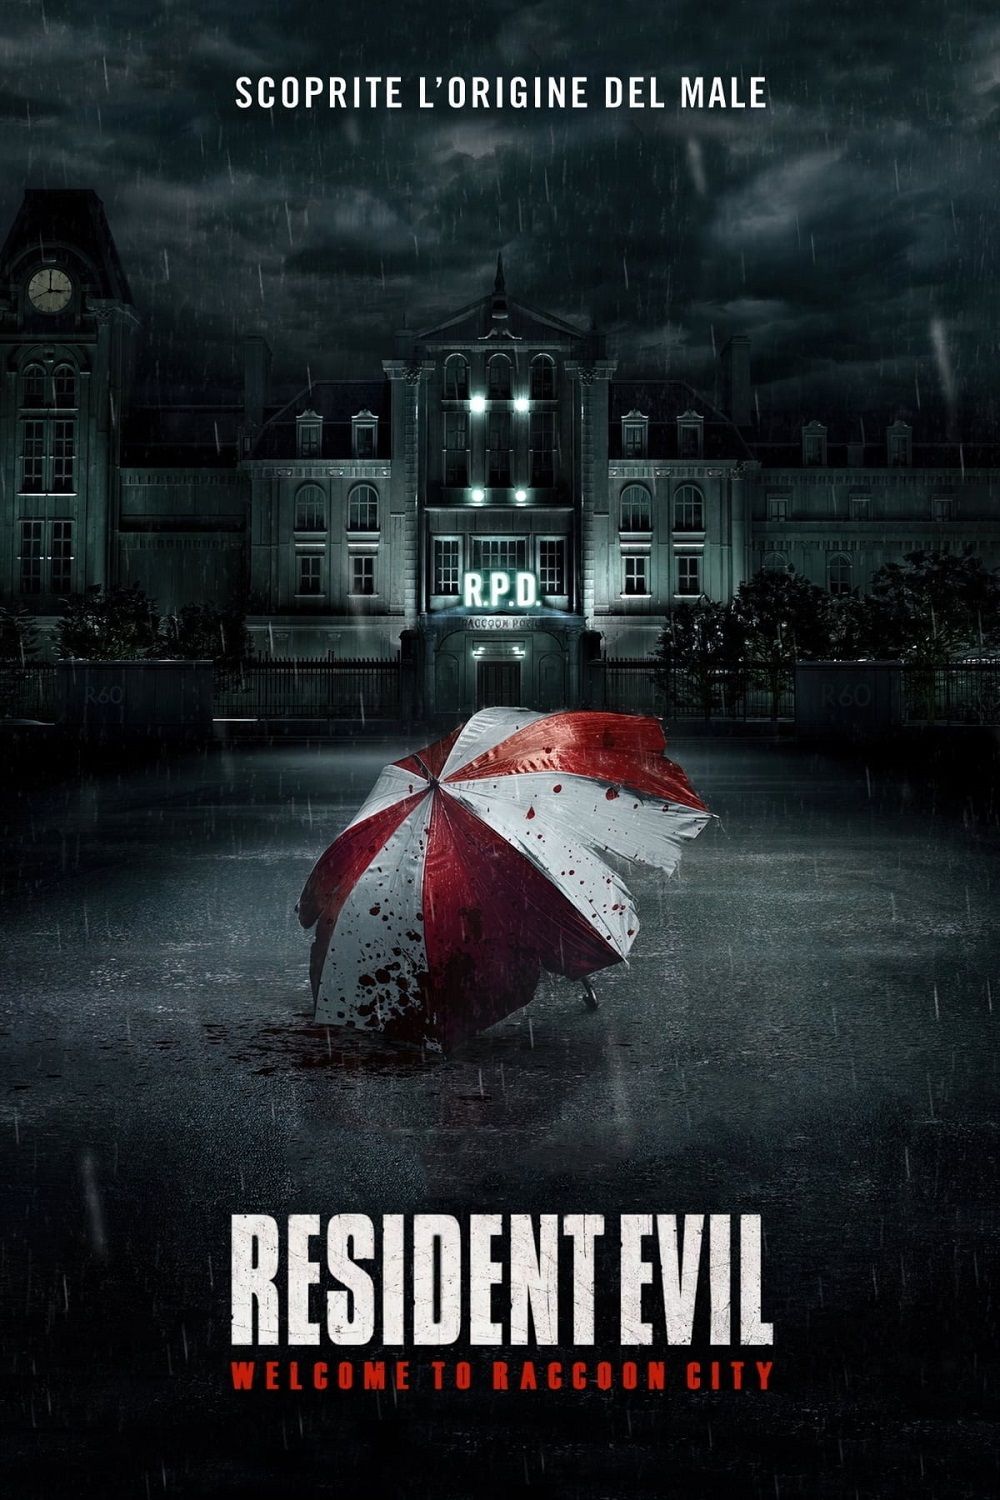 Copertina Film Resident Evil: Welcome to Raccoon City Streaming FULL HD 